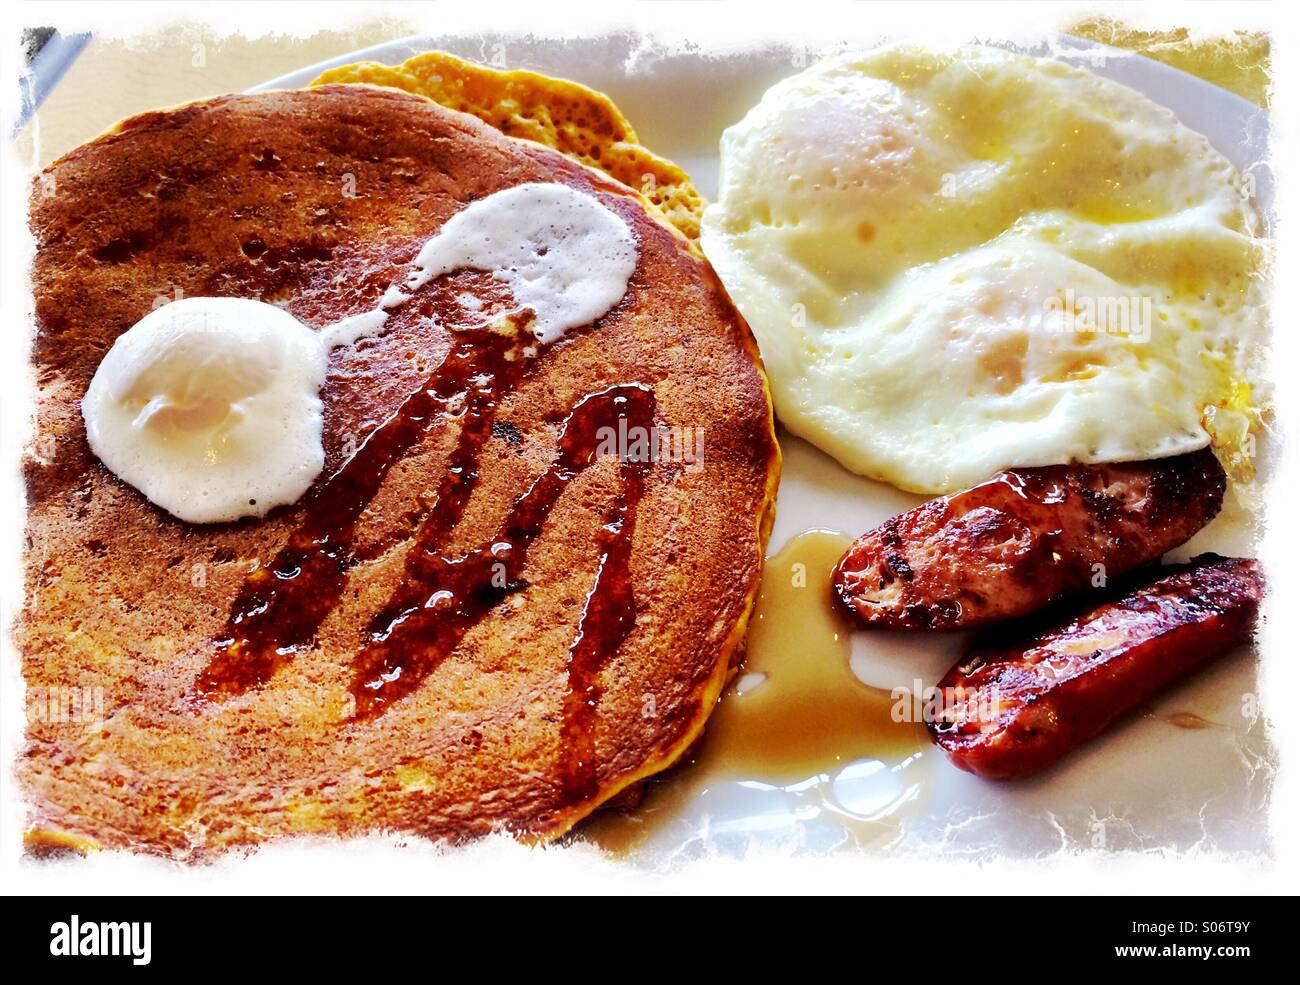 Breakfast of pancakes, syrup, eggs and sausage. Stock Photo